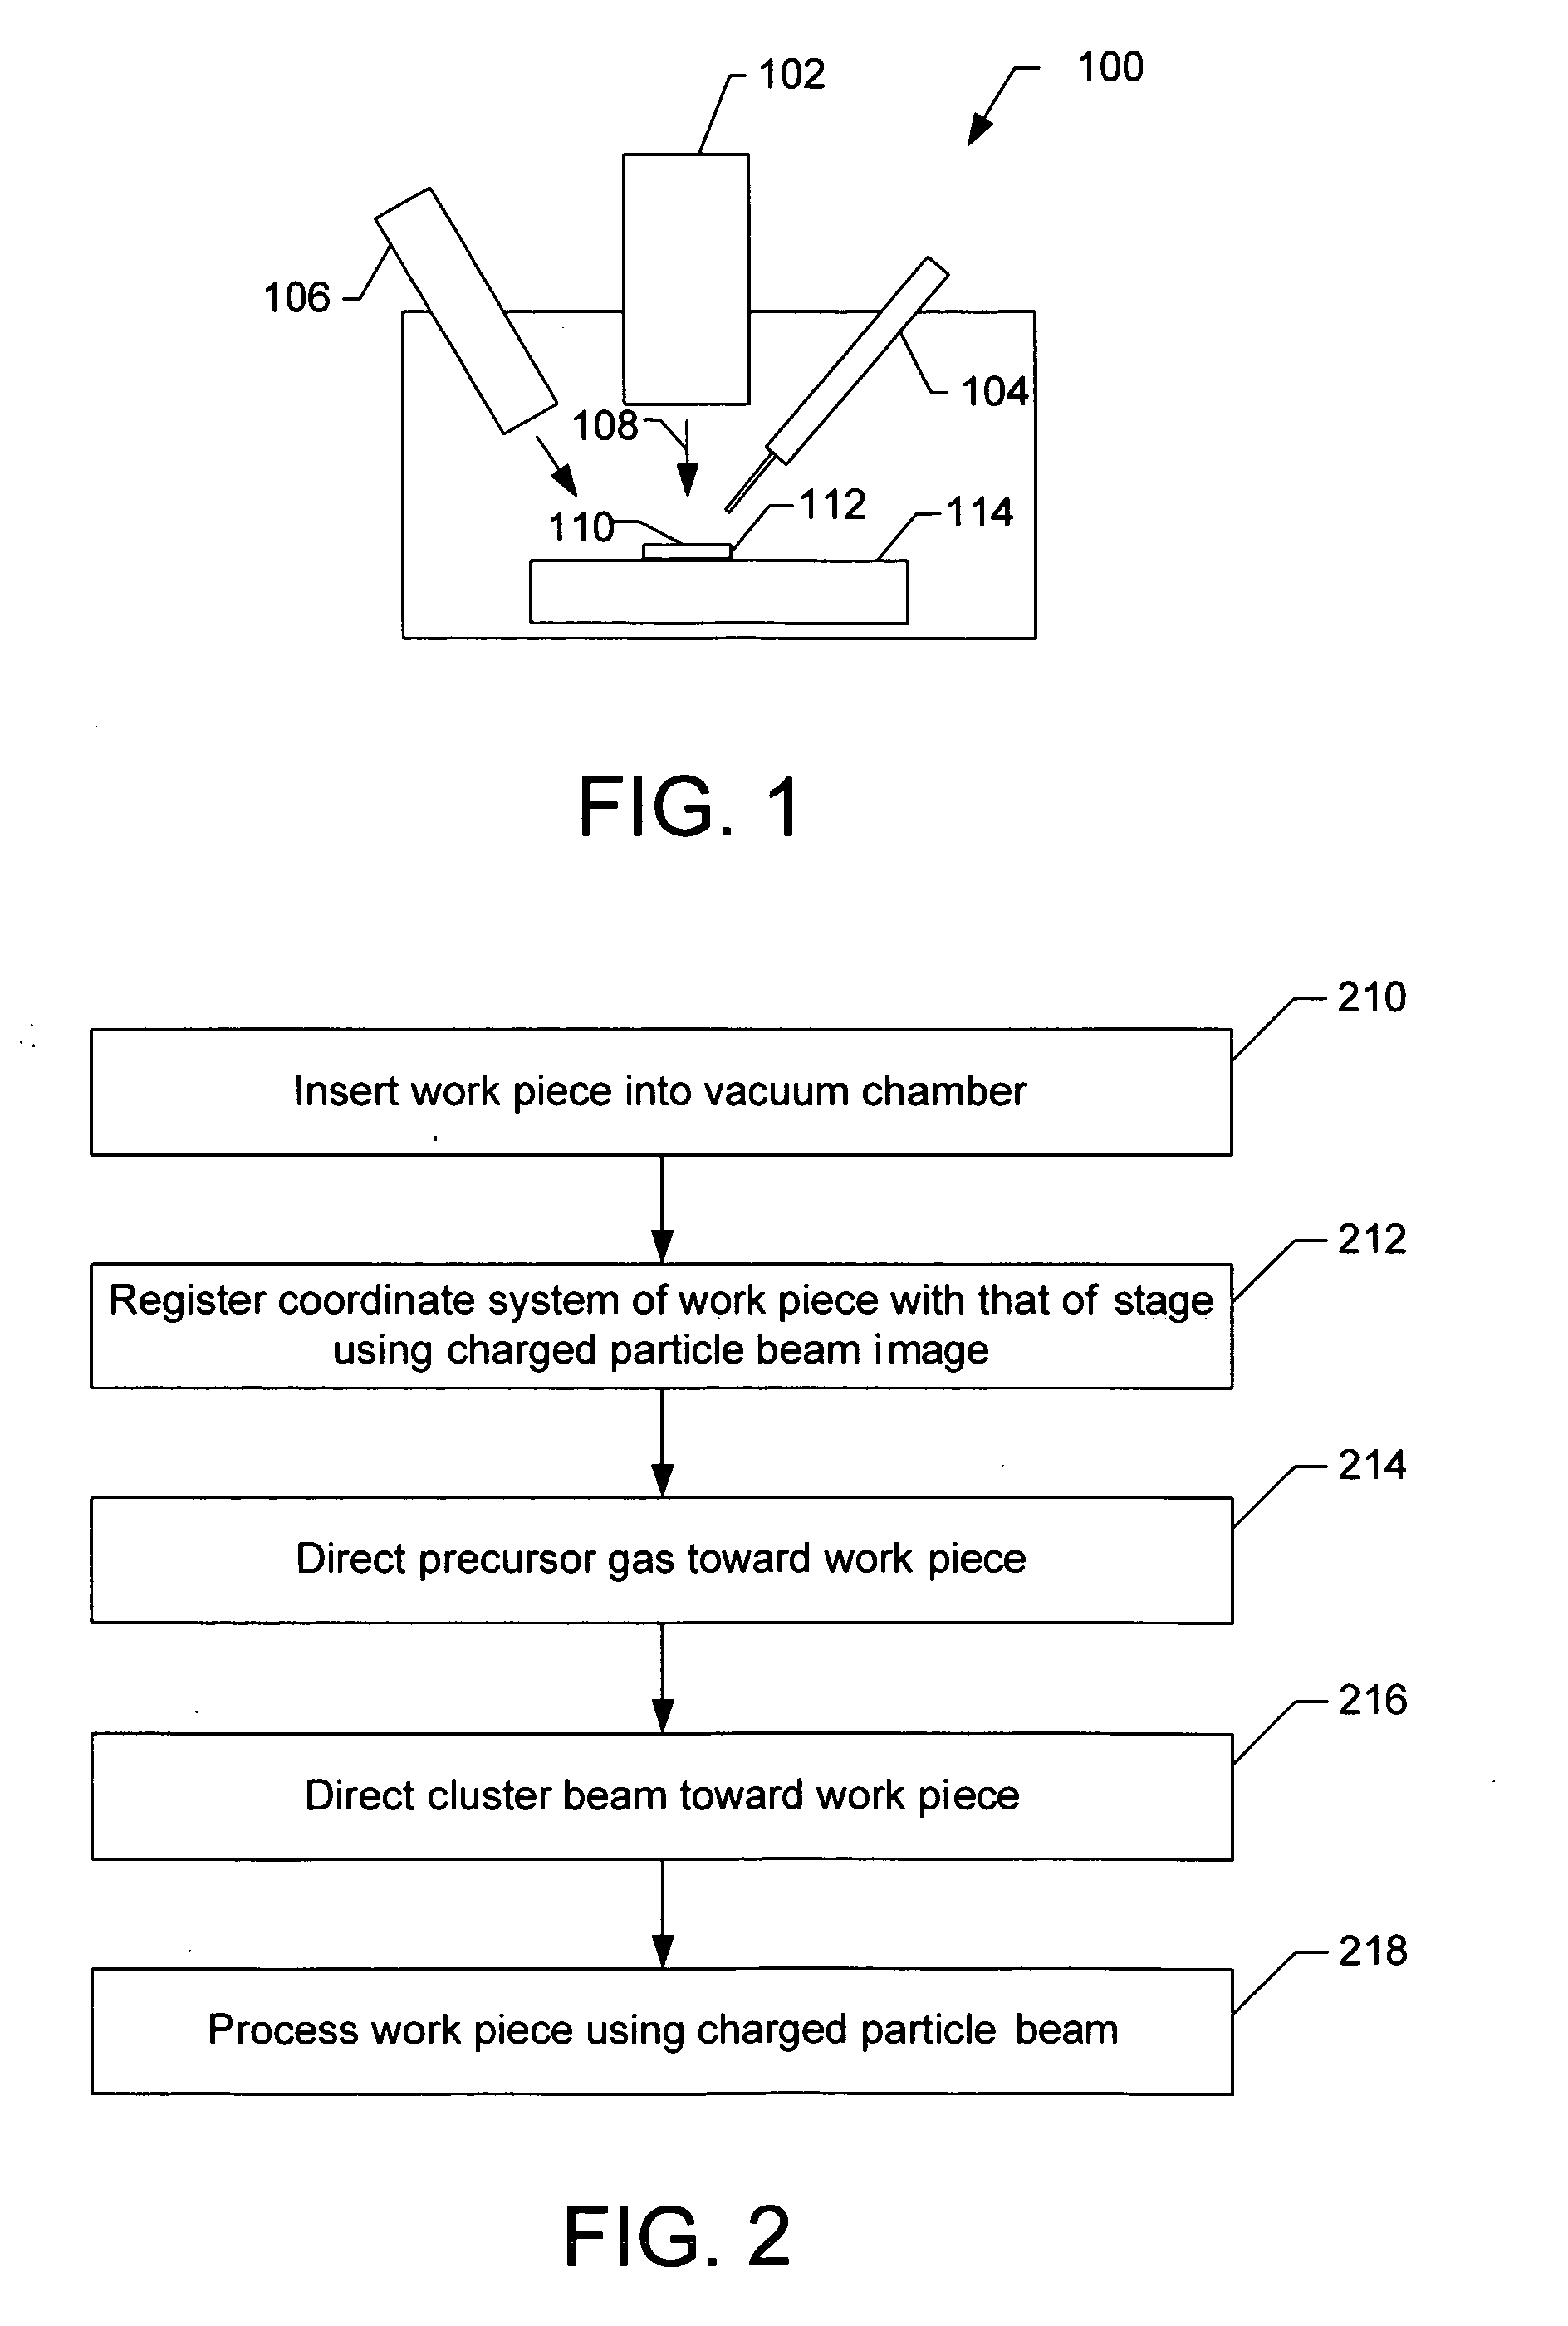 Charged-particle-beam processing using a cluster source